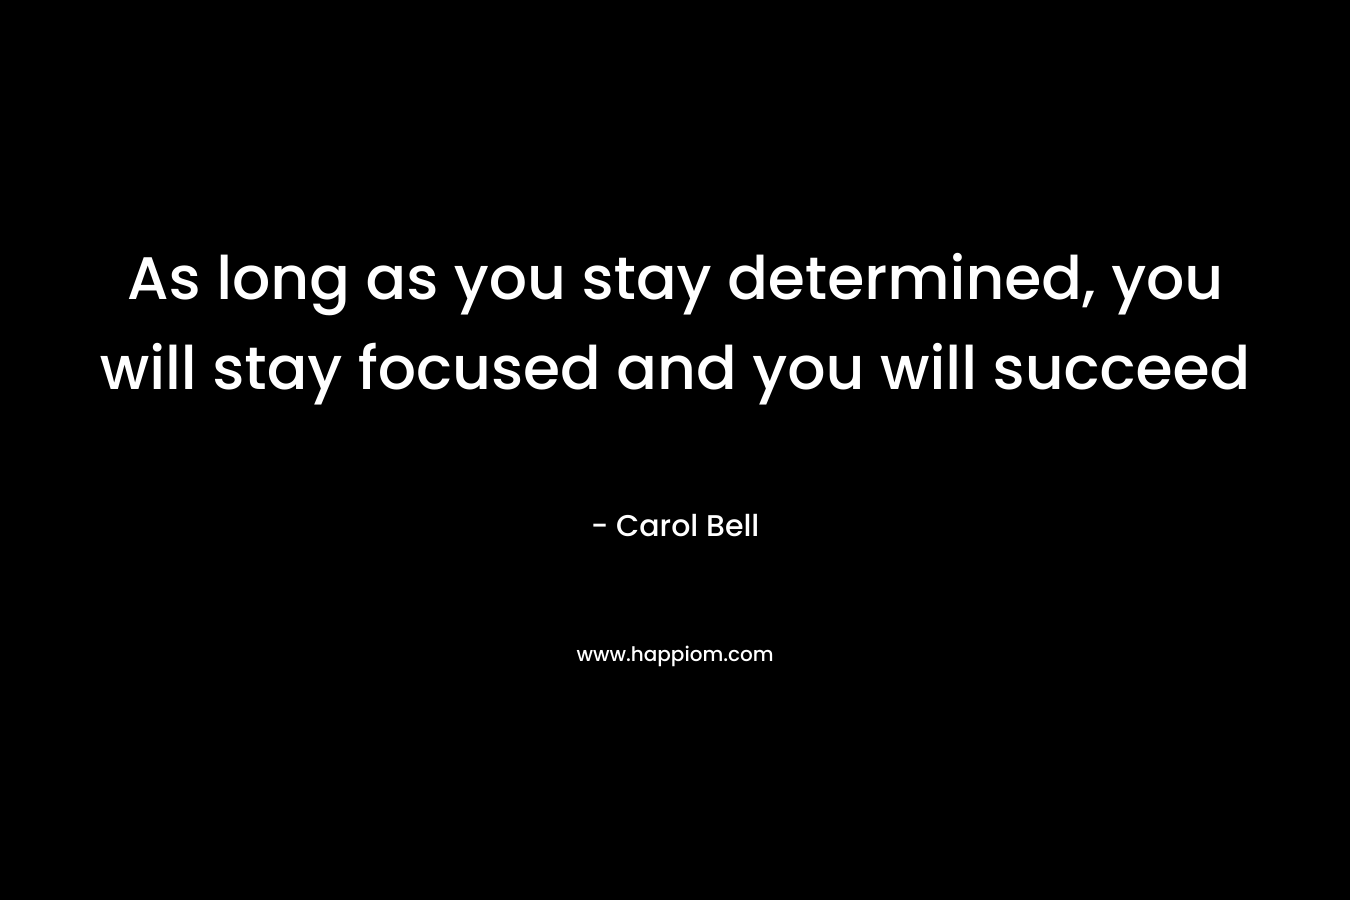 As long as you stay determined, you will stay focused and you will succeed